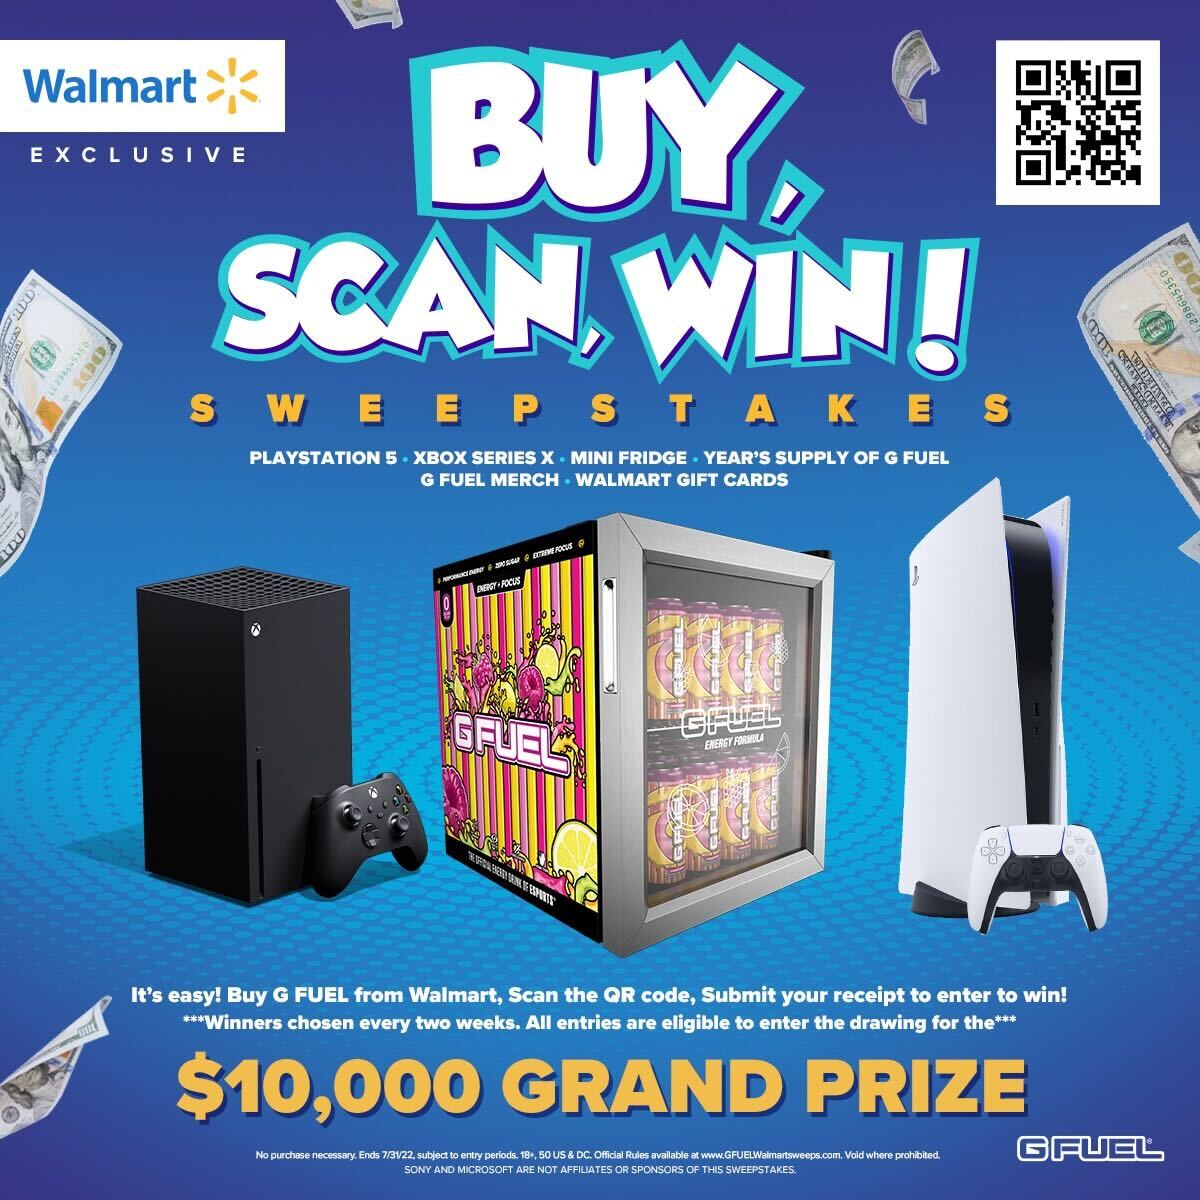 Buy, Scan, Win at Walmart: Score a $10,000 Grand Prize, gaming consoles, G FUEL Mini Fridges, a year supply of G FUEL and more!